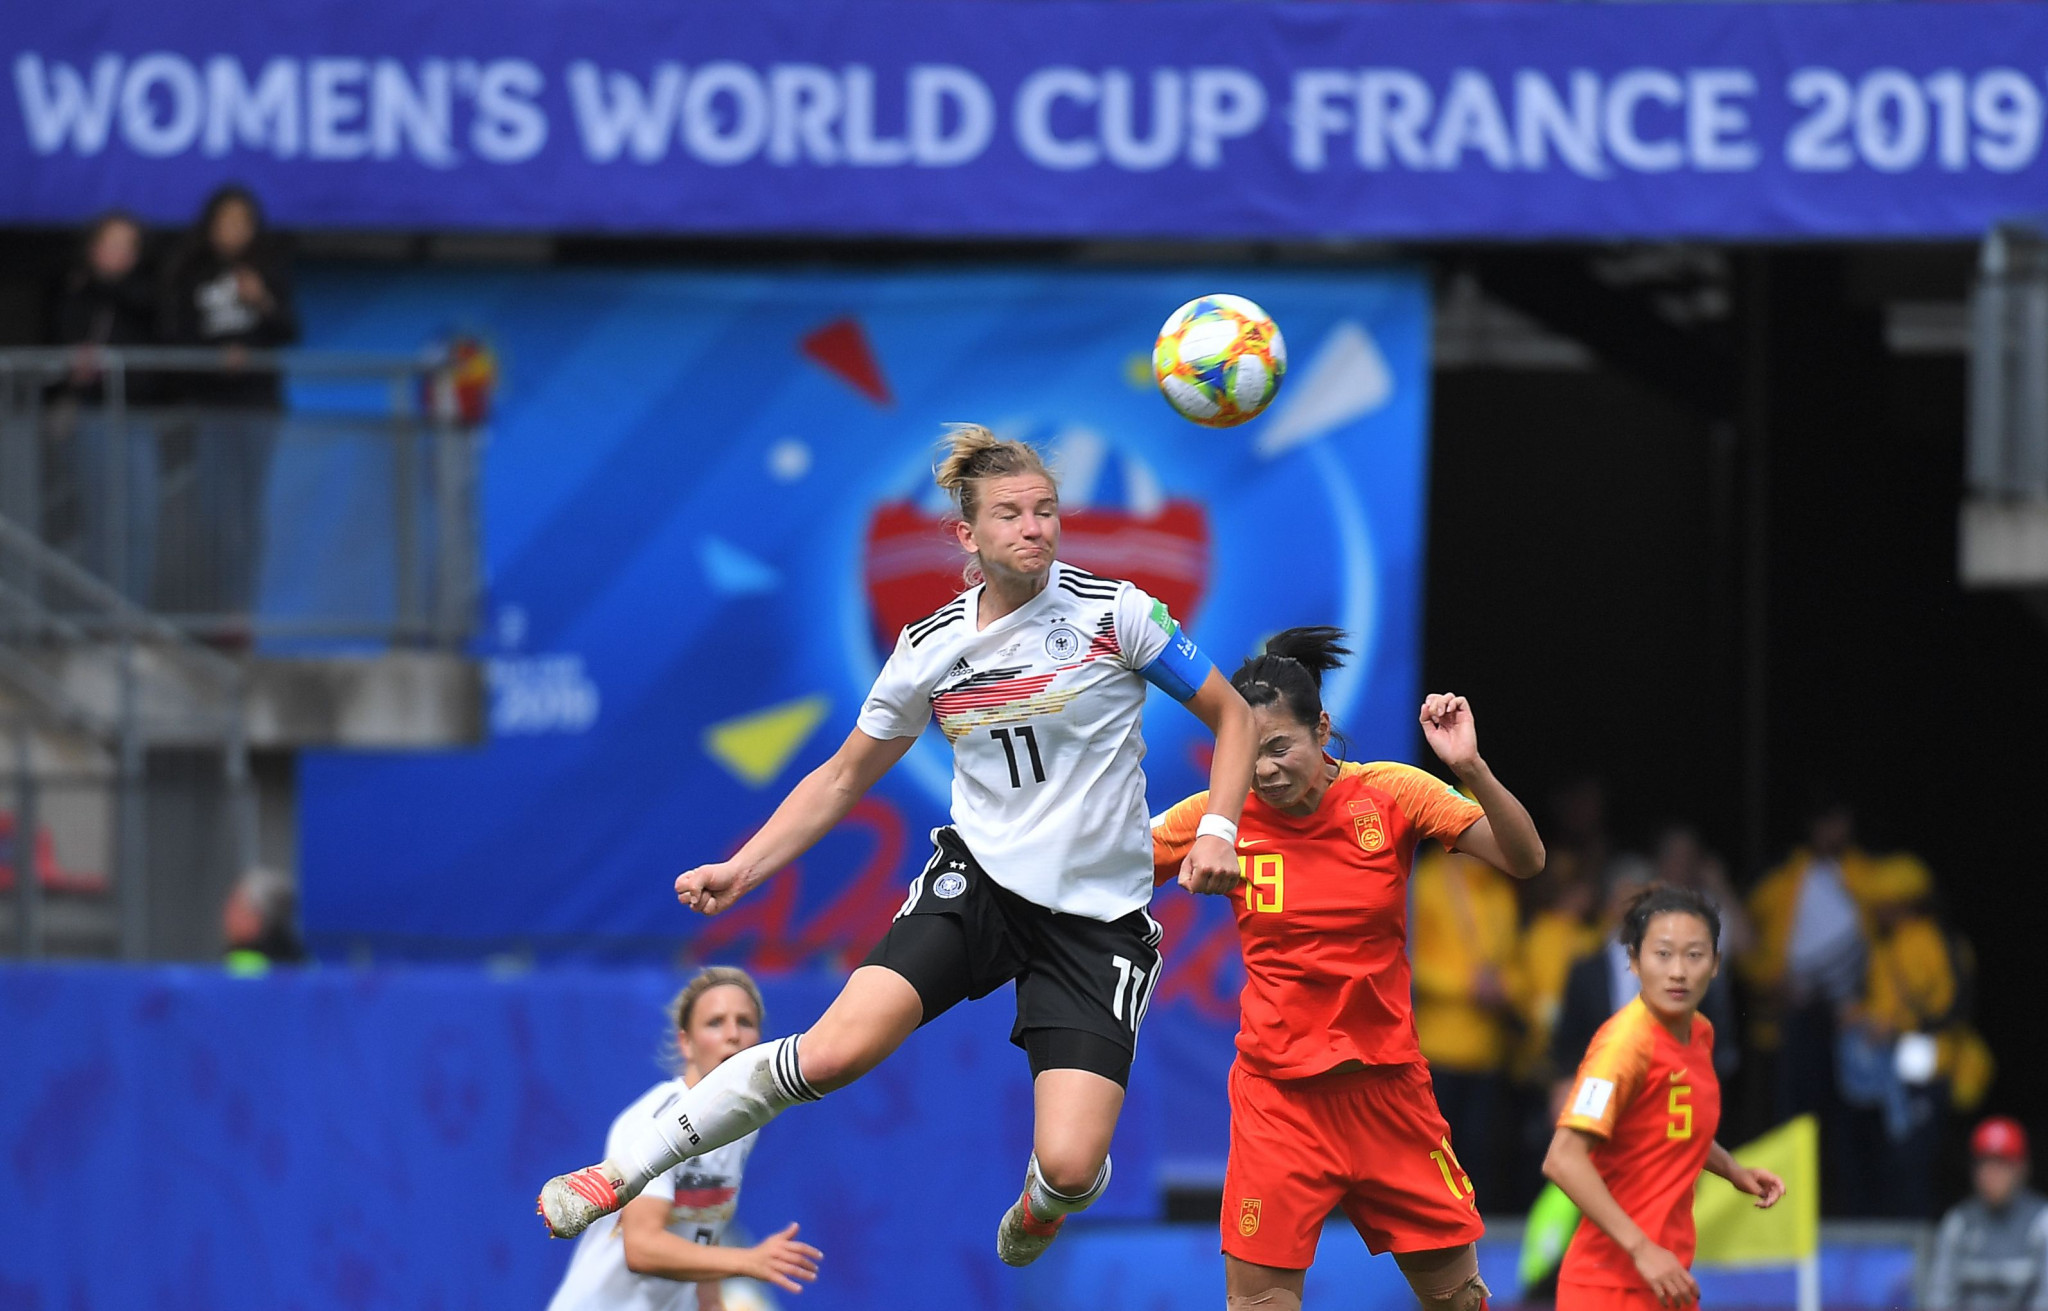 France, one of the bidders for the UEFA Women's Euro 2025, also held the FIFA Women's World Cup in 2019 ©Getty Images